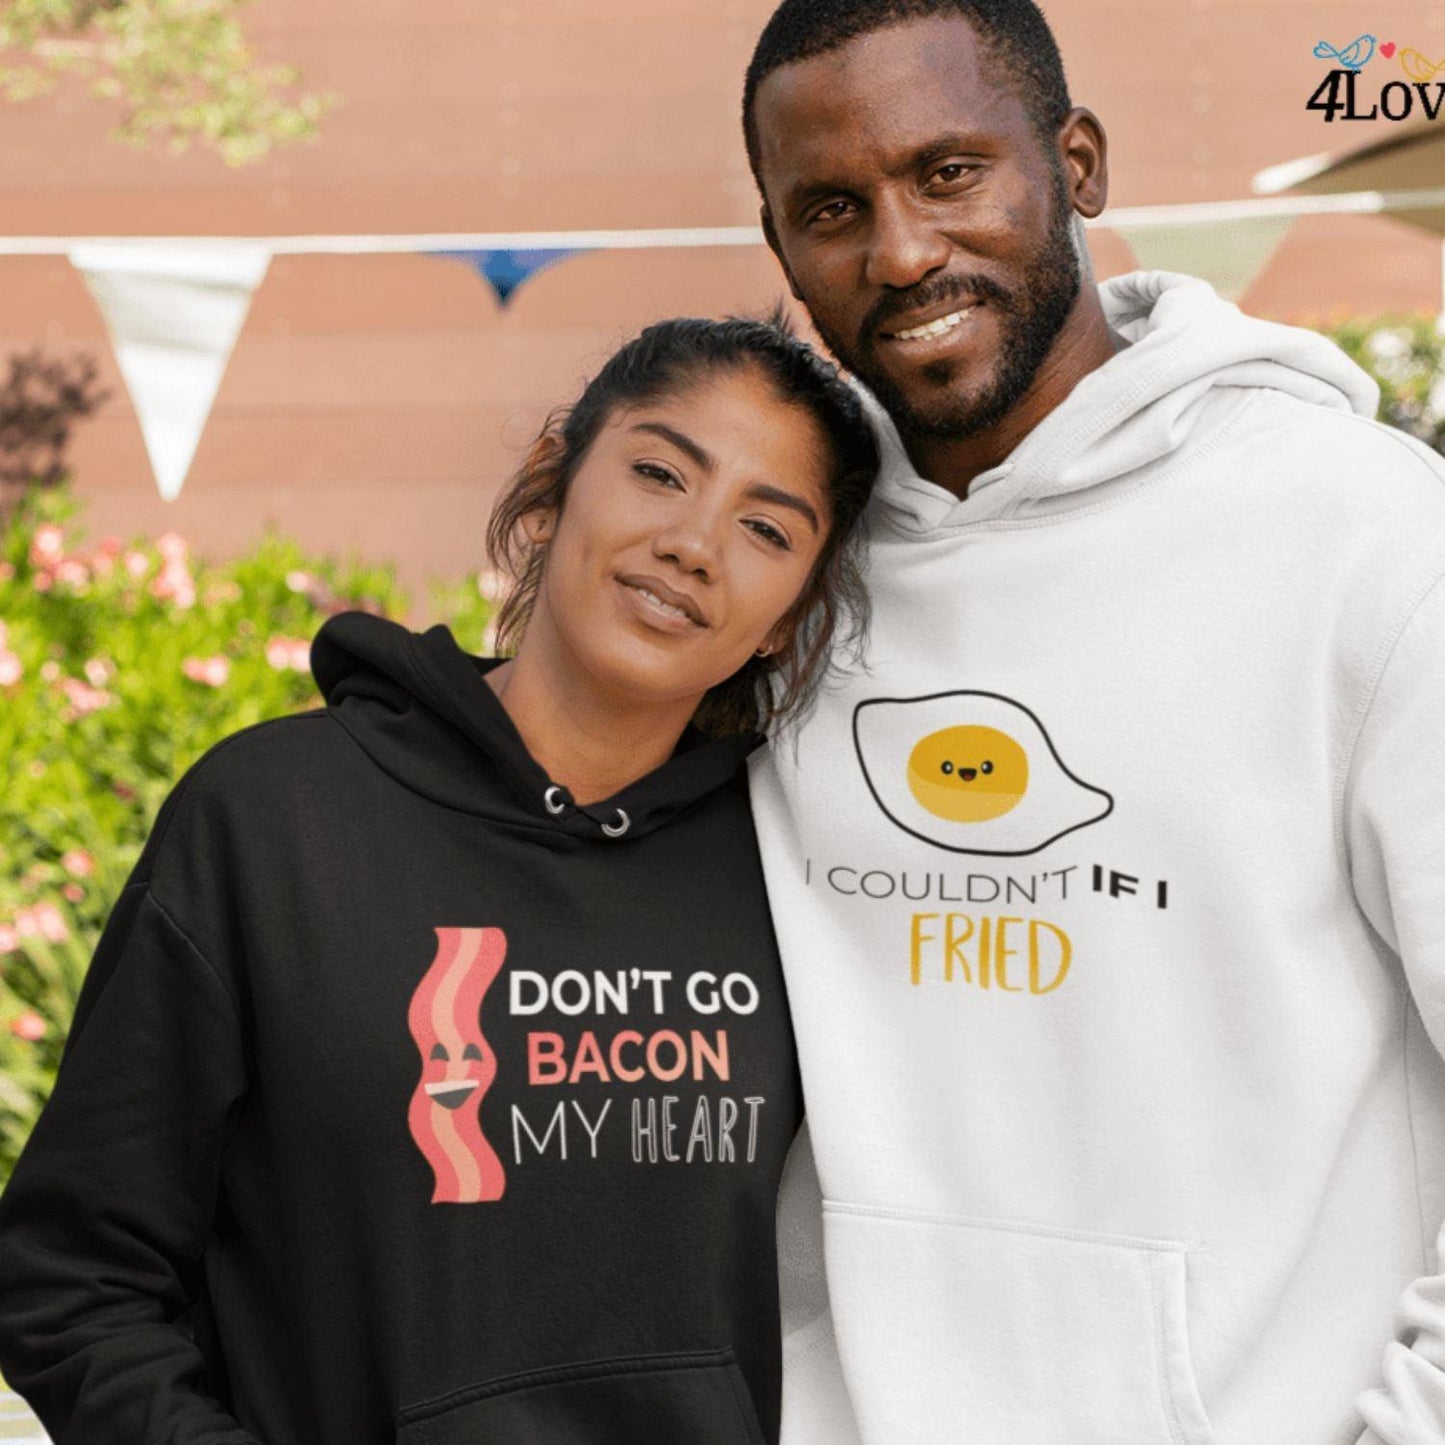 Couples Don't go Bacon my heart/I couldn’t if I fried - Matching Set for Couples - 4Lovebirds